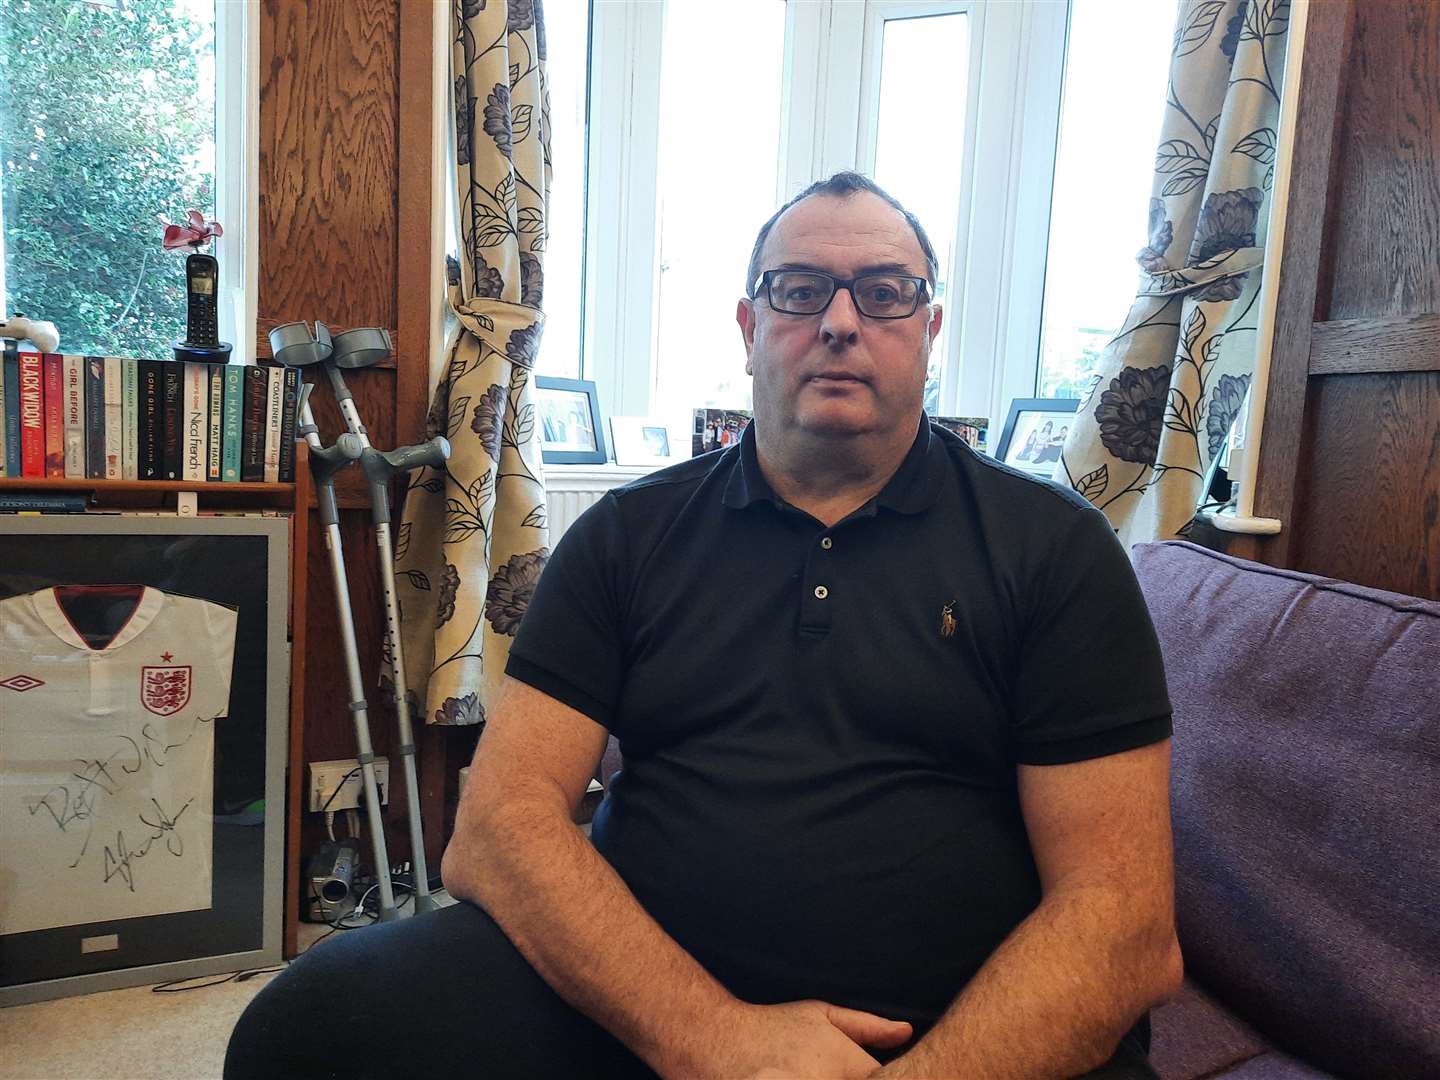 Keith now struggles to walk unassisted, is fatigued and has PTSD following his Covid battle